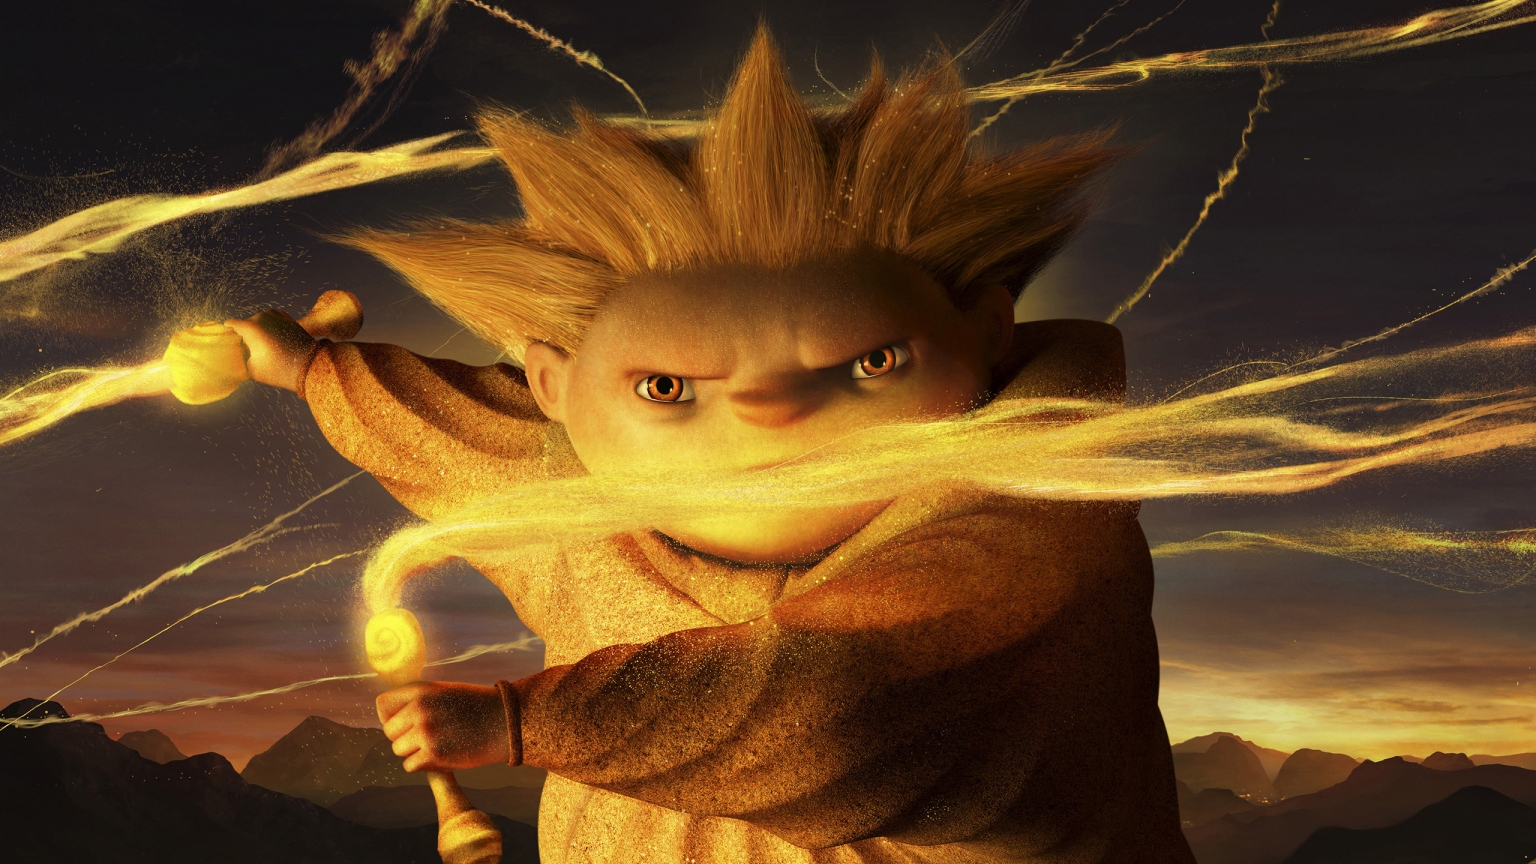 The Sandman Rise Of The Guardians for 1536 x 864 HDTV resolution